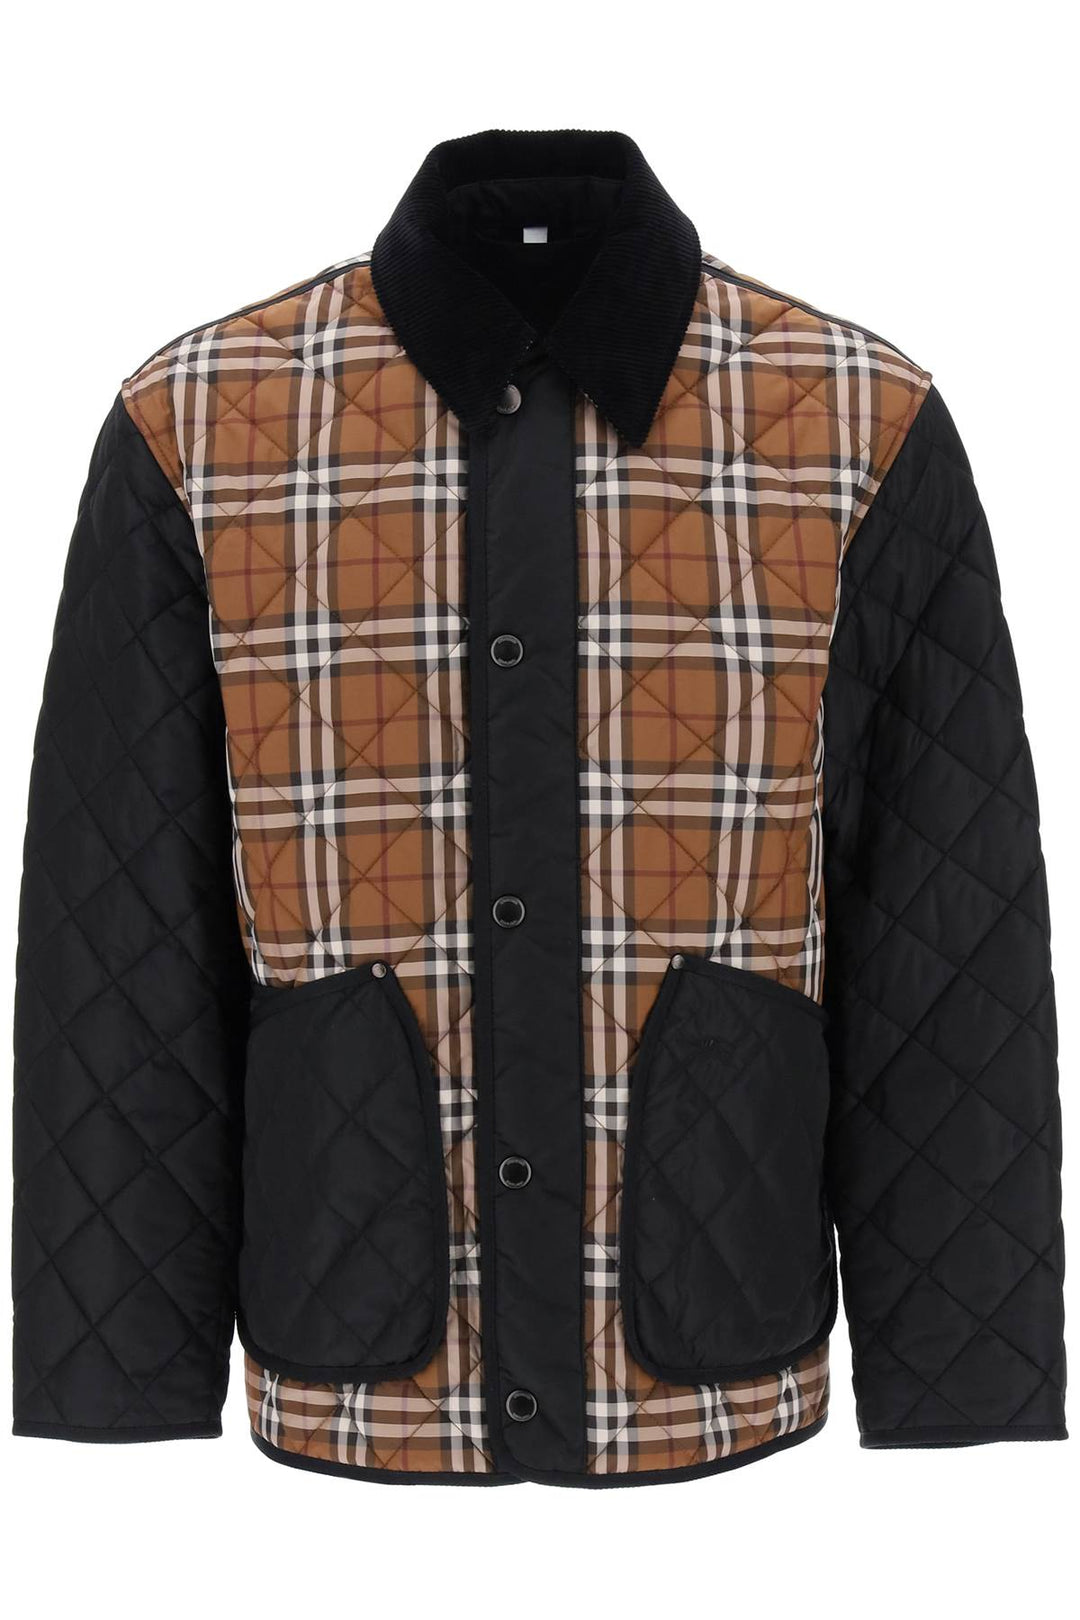 Burberry Weavervale Quilted Jacket   Marrone